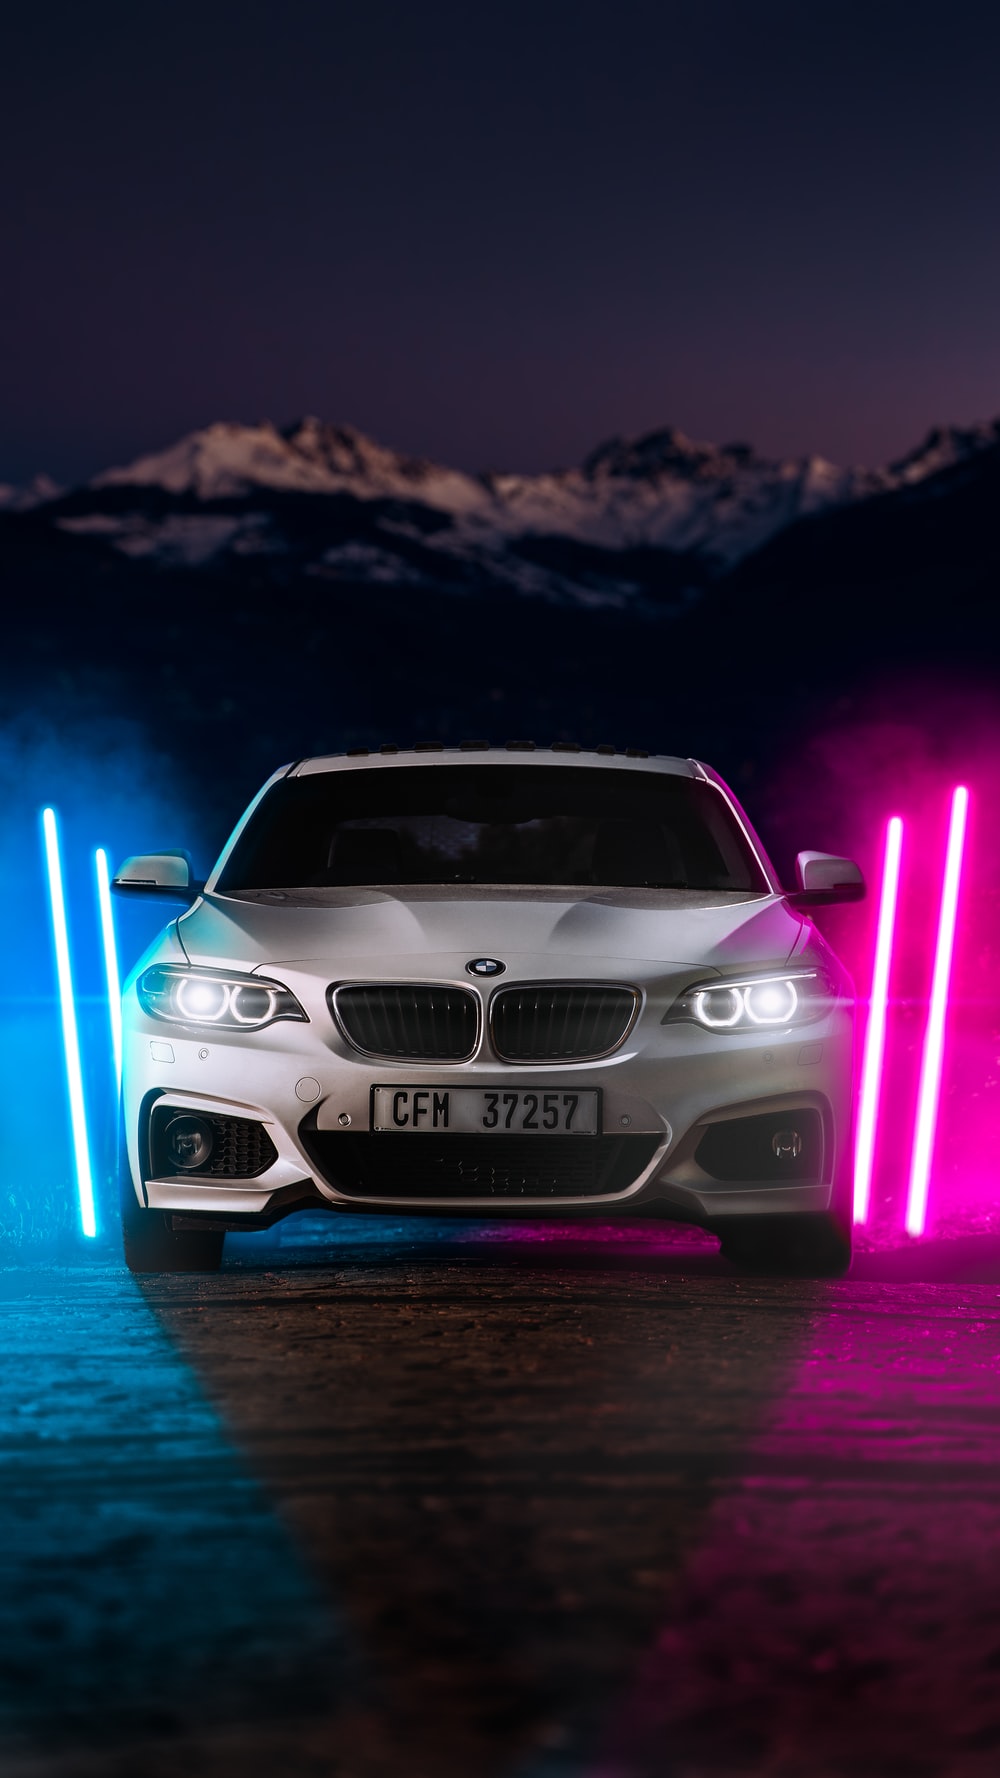 Car Neon Picture. Download Free Image